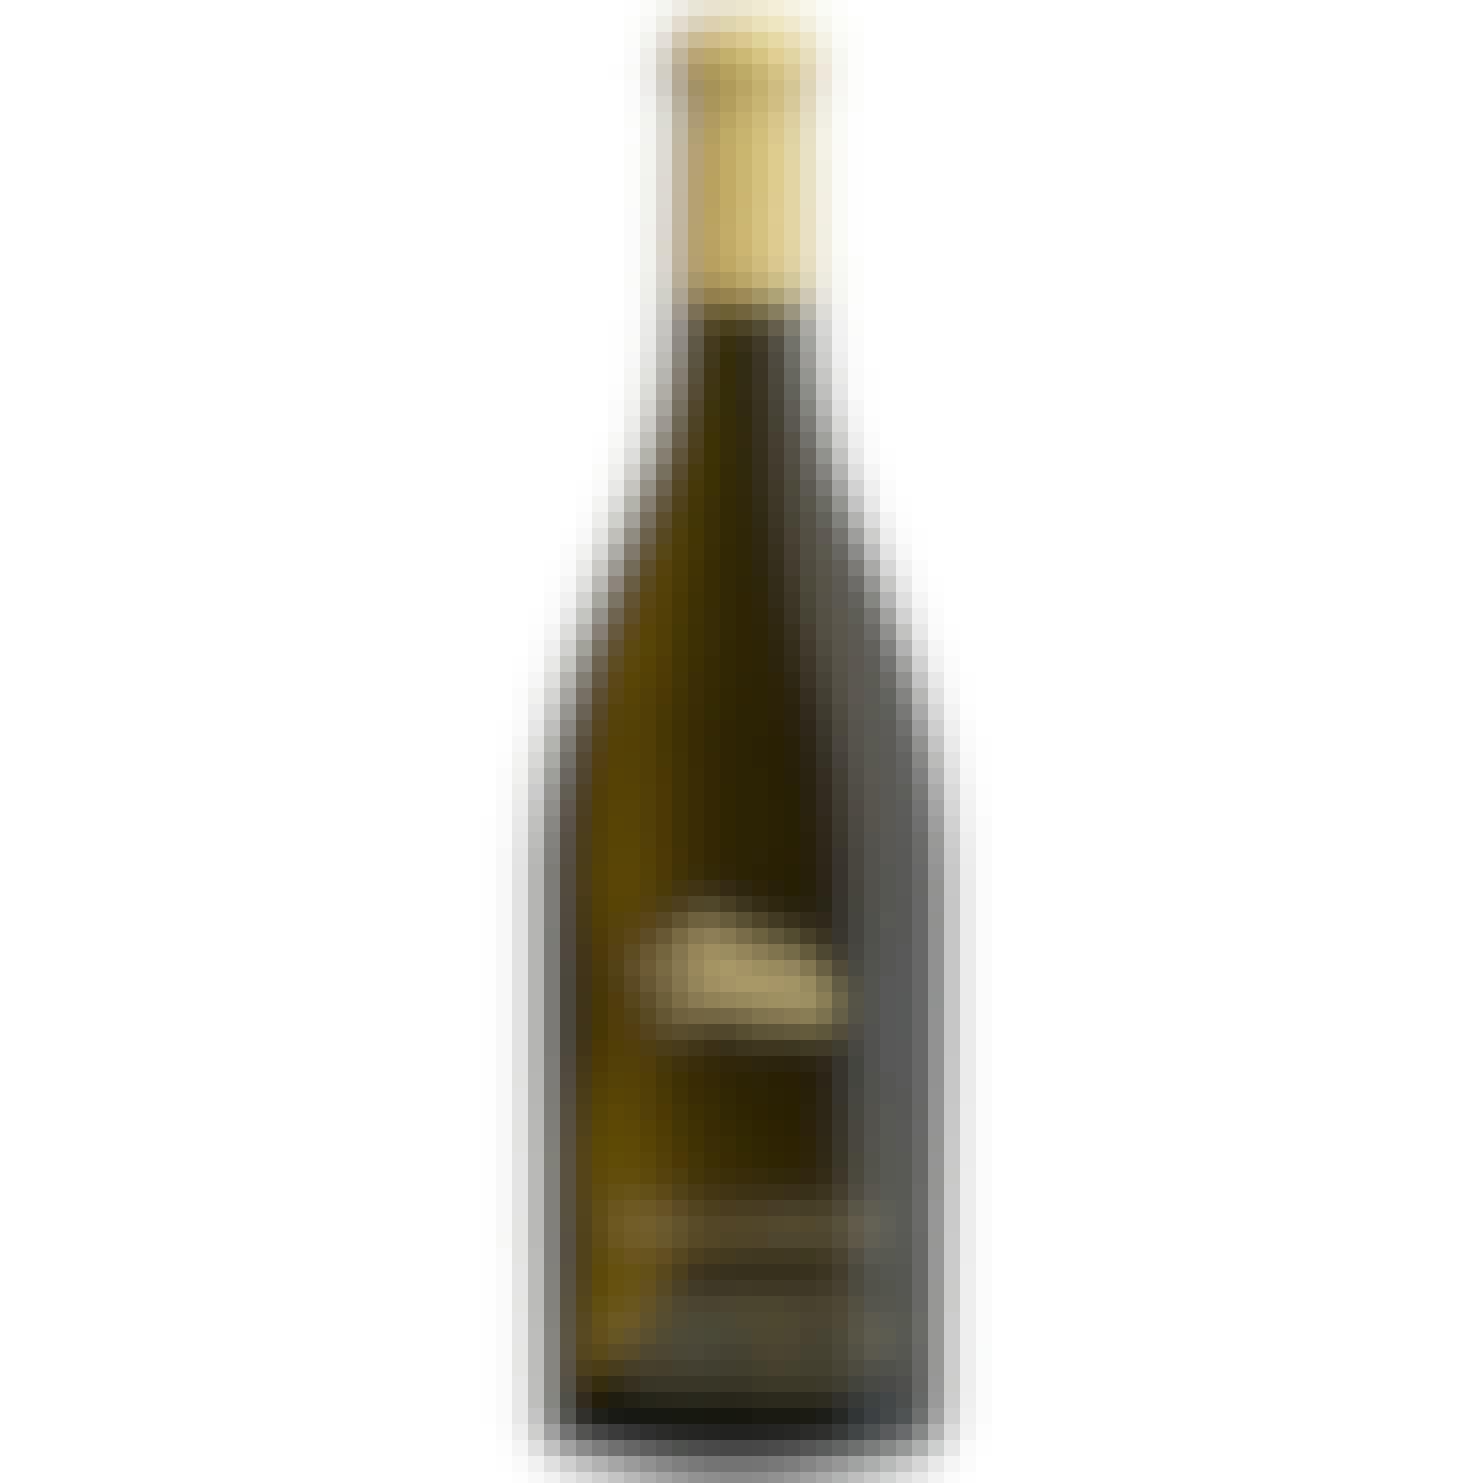 Hess Collection The Lioness Chardonnay 2018 750ml